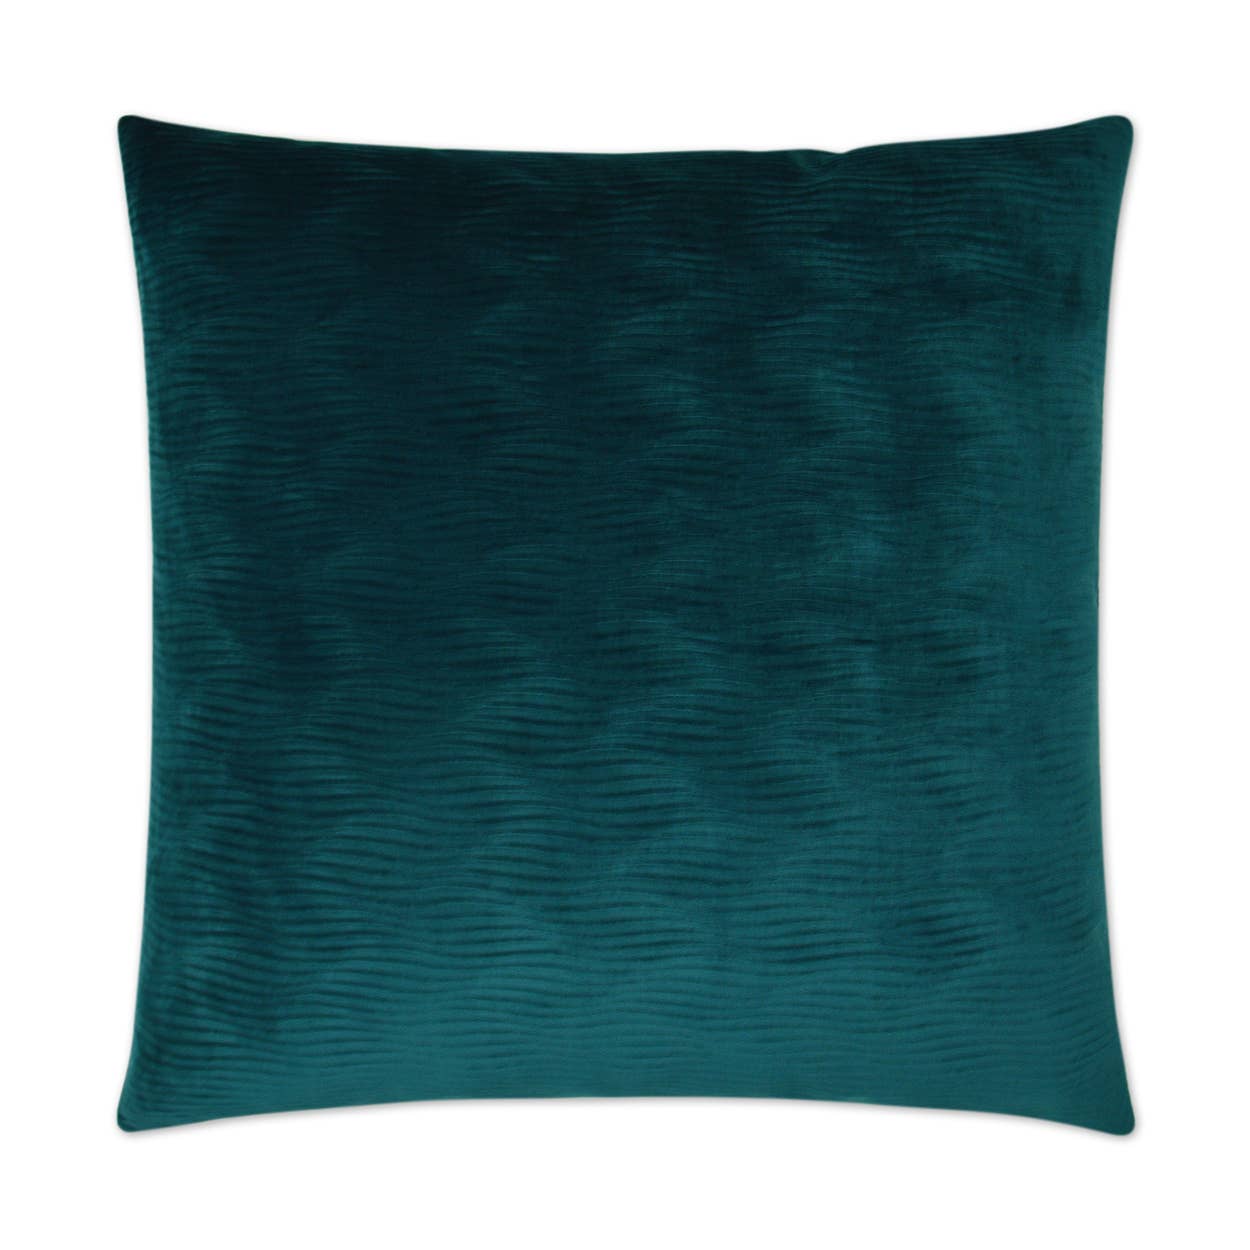 Stream Pillow in Teal